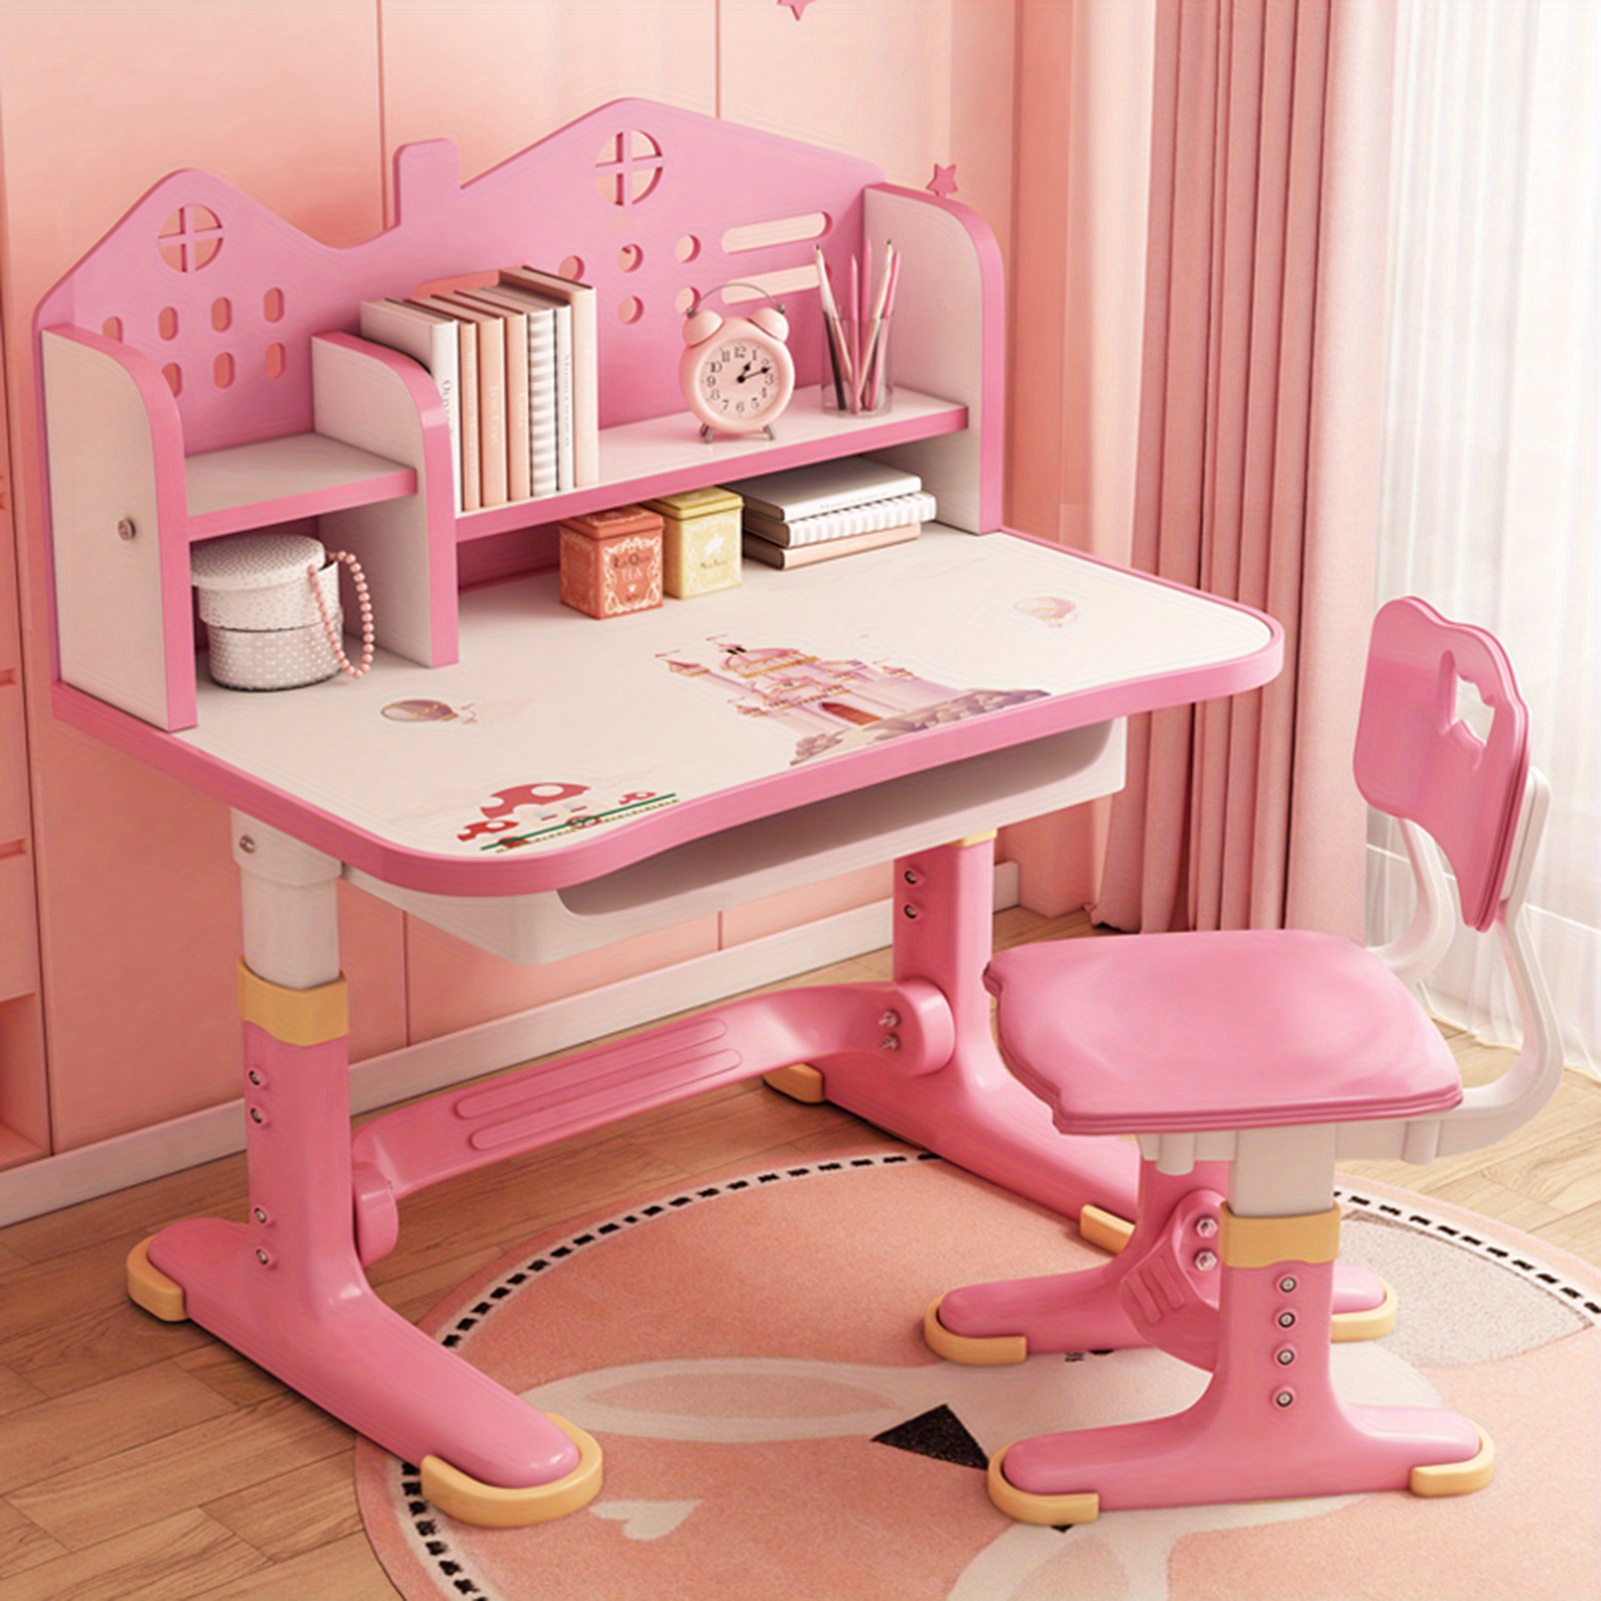 

1 41.37*29.75*24.63 Inches Children's Functional Desks And Chairs Set, Height Adjustable School Study Table With Castle Back, Wider Desktop, Bookshelf And Storage Drawer (pink)